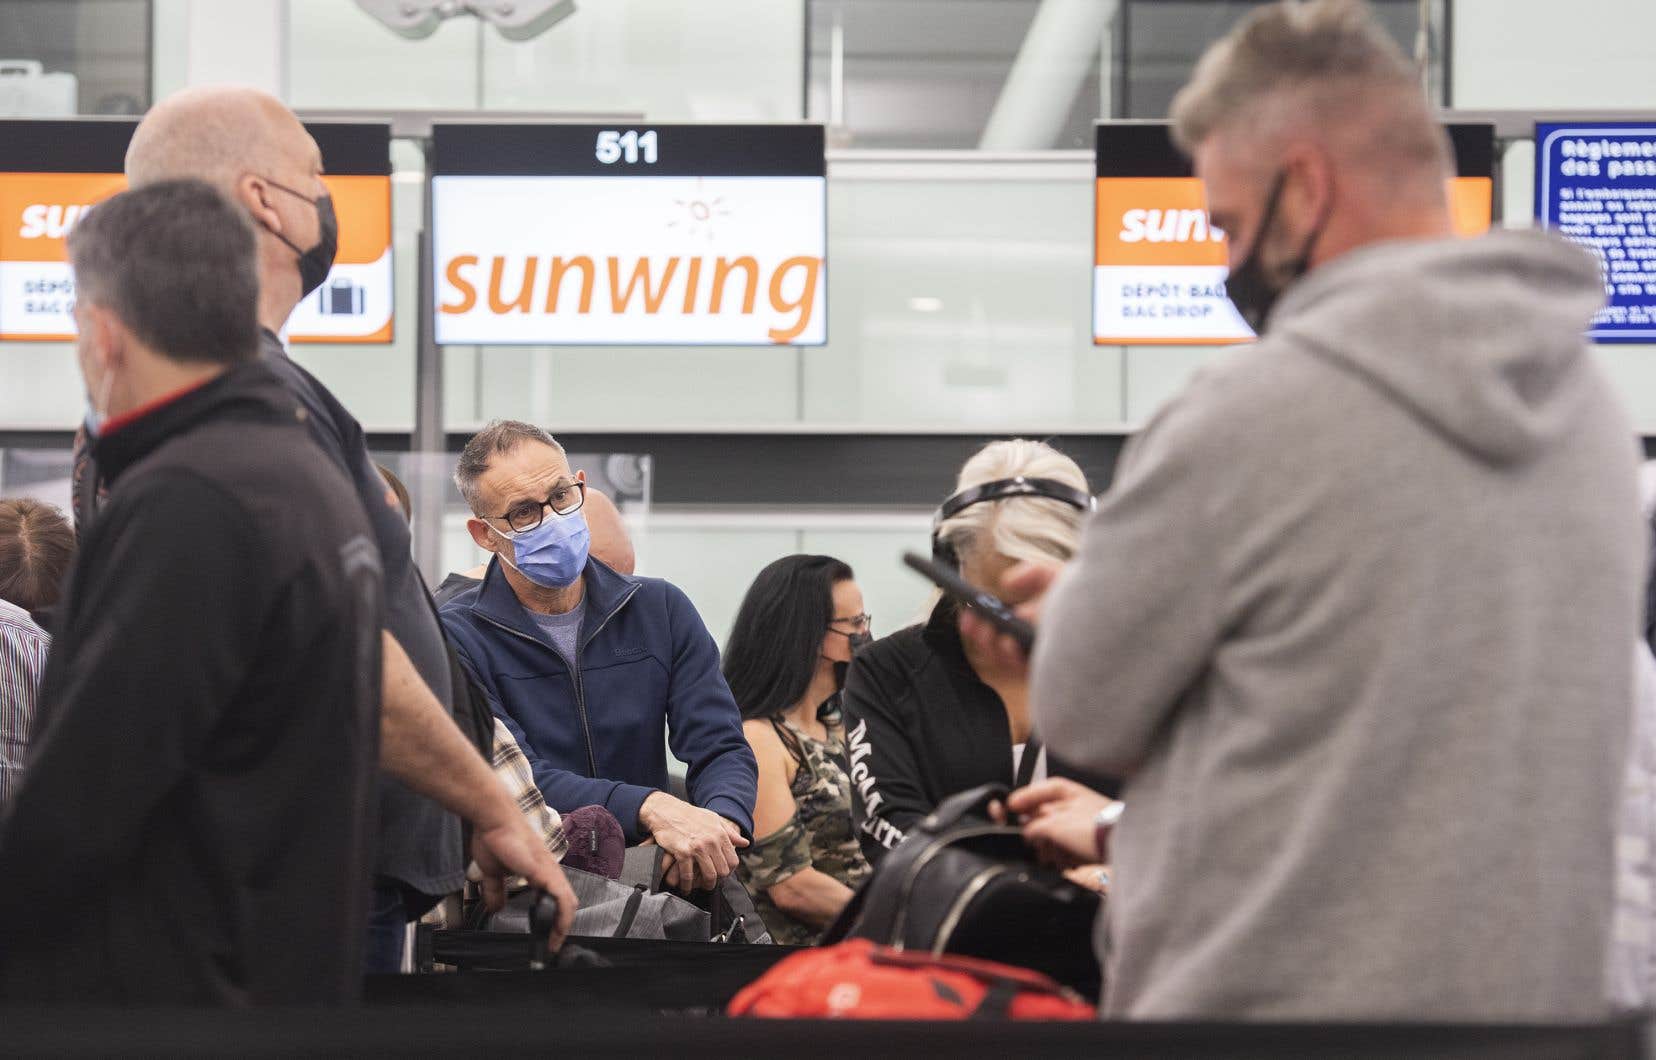 Sunwing's chaos and confusion continues after the IT security issue

